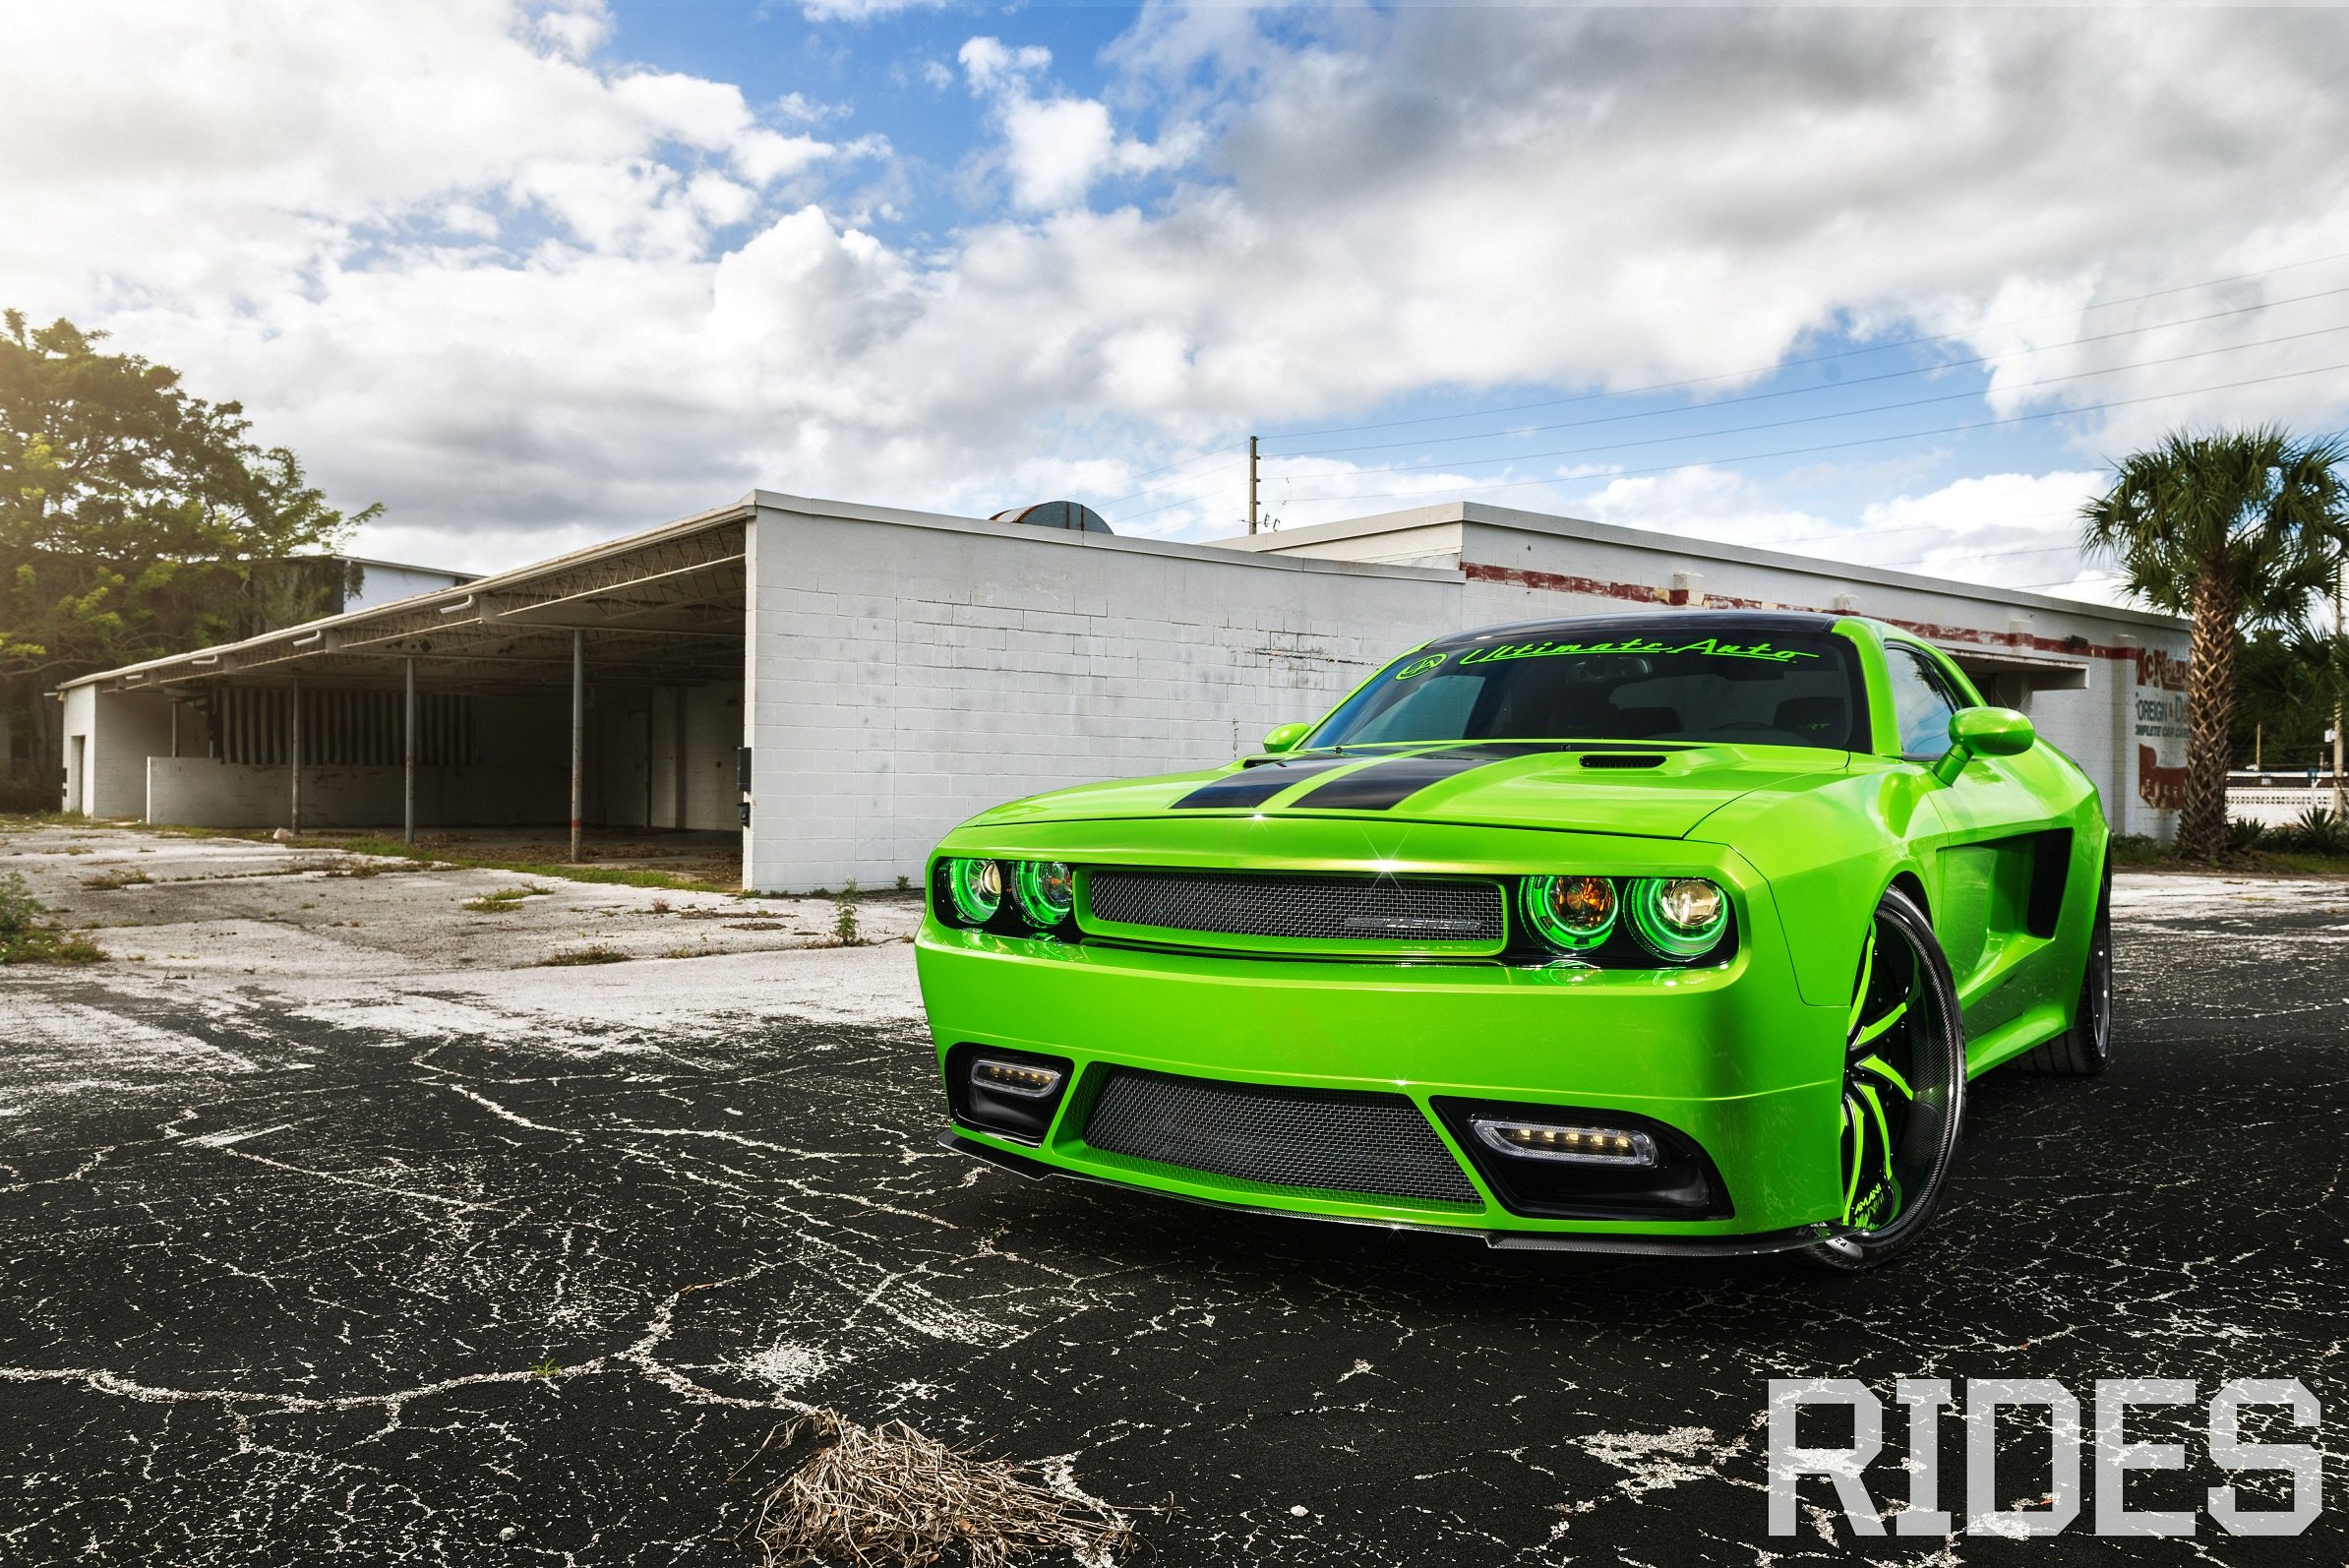 Lime Dodge Challenger With a Massive Widebody Kit - Photo by William Stern